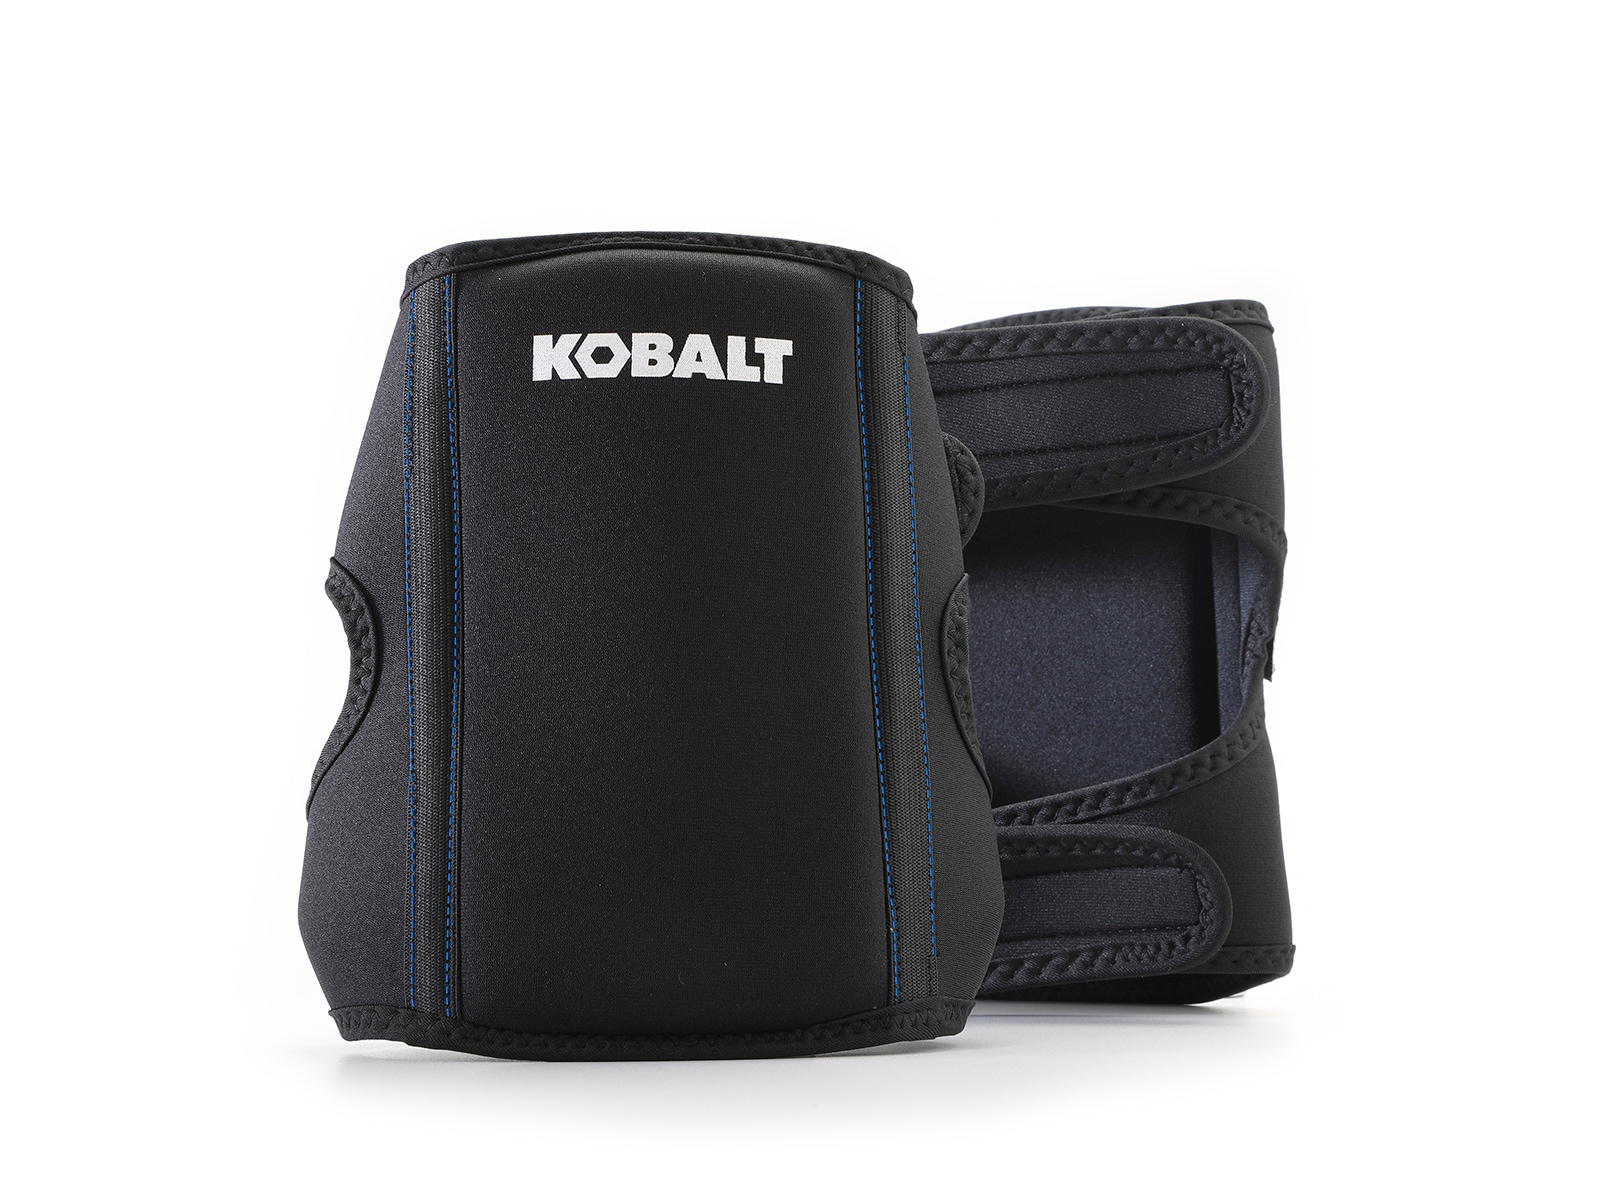 Knee Pad Inserts - Extra Firm 